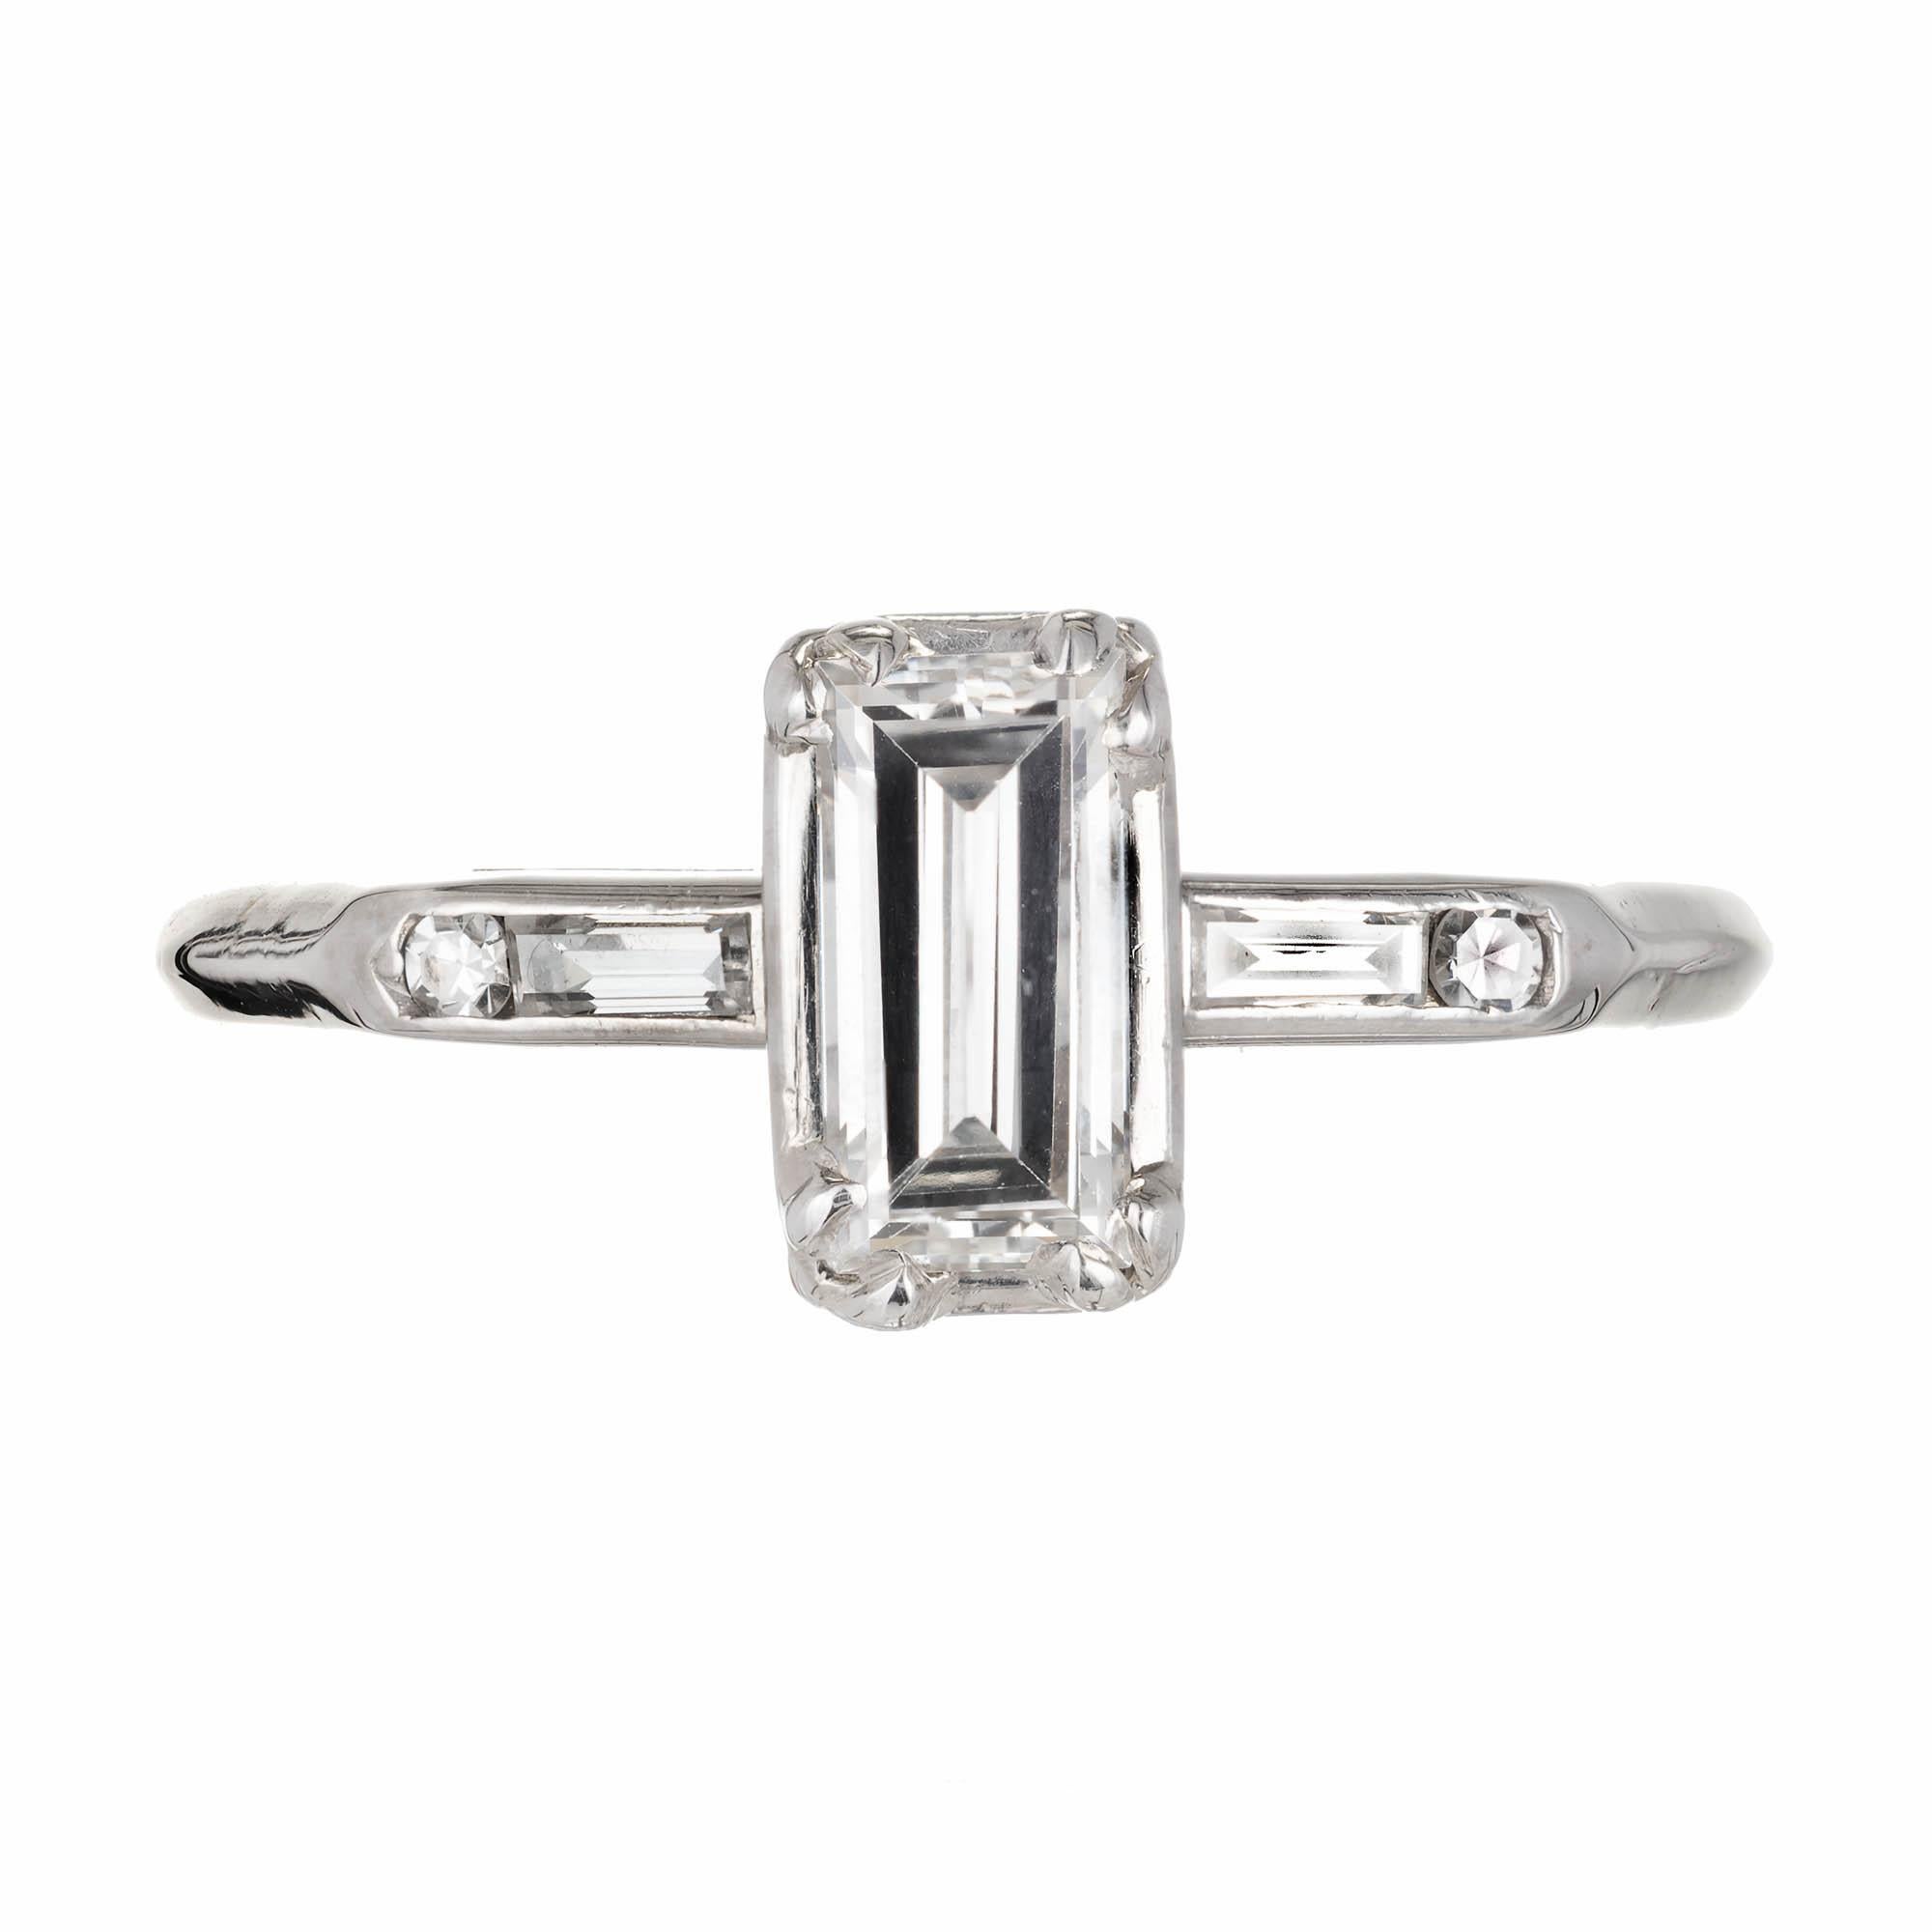 Vintage all original 1950 bright emerald step cut diamond ring with baguette and round diamond accents.

1 rectangular step cut G-H VS2 Diamond Approximate .60 carats. EGL Certificate US 314492602D
2 straight cut baguette G VS diamonds Approximate